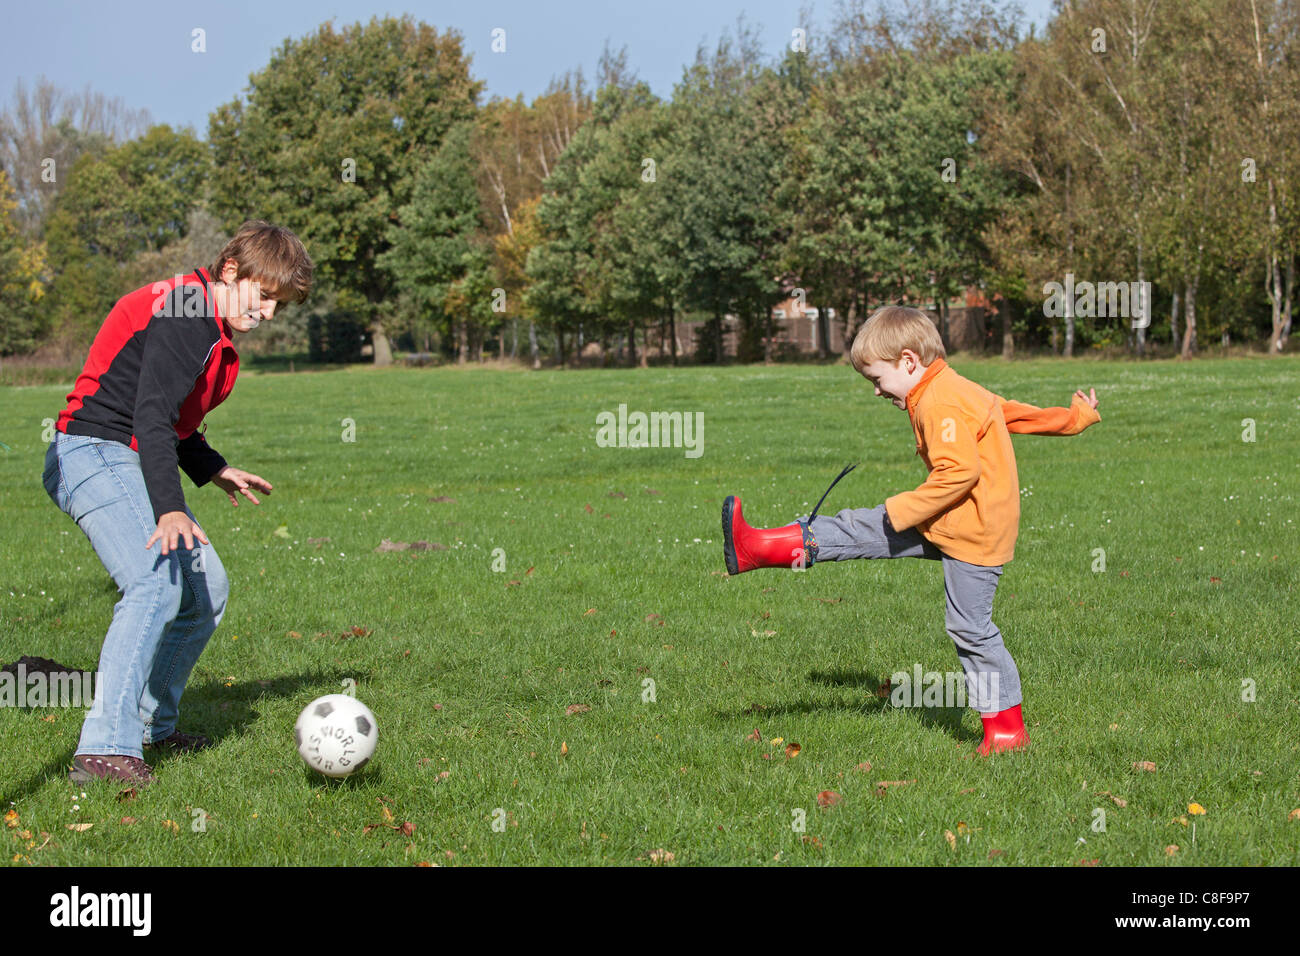 young boy playing football against a woman Stock Photo